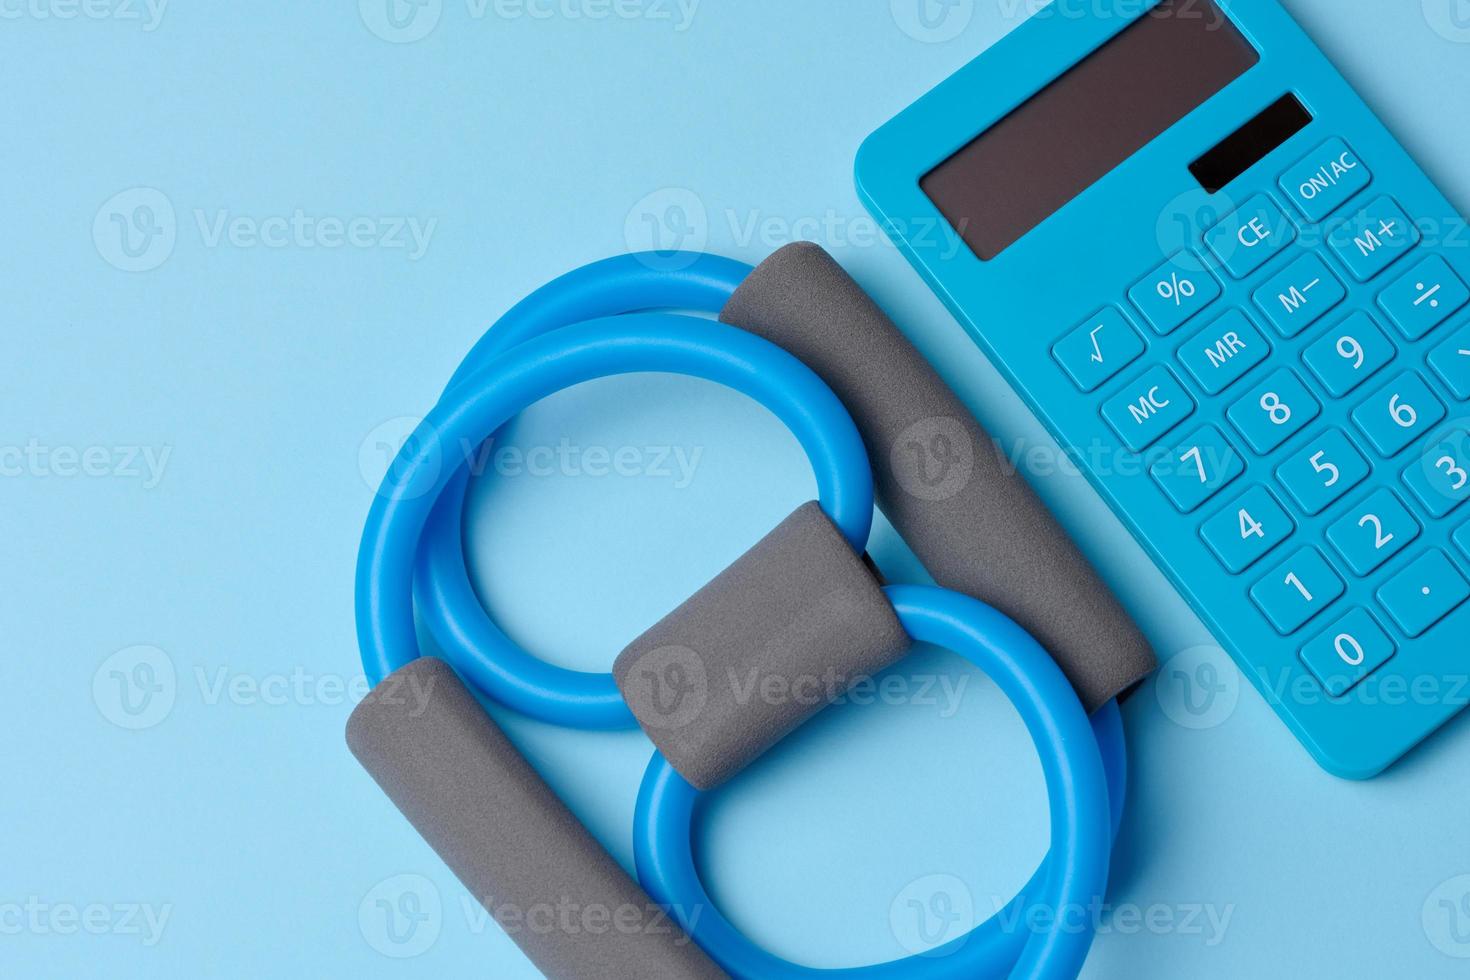 Rubber sports simulator expander and a calculator on a blue background, top view, calorie counting photo